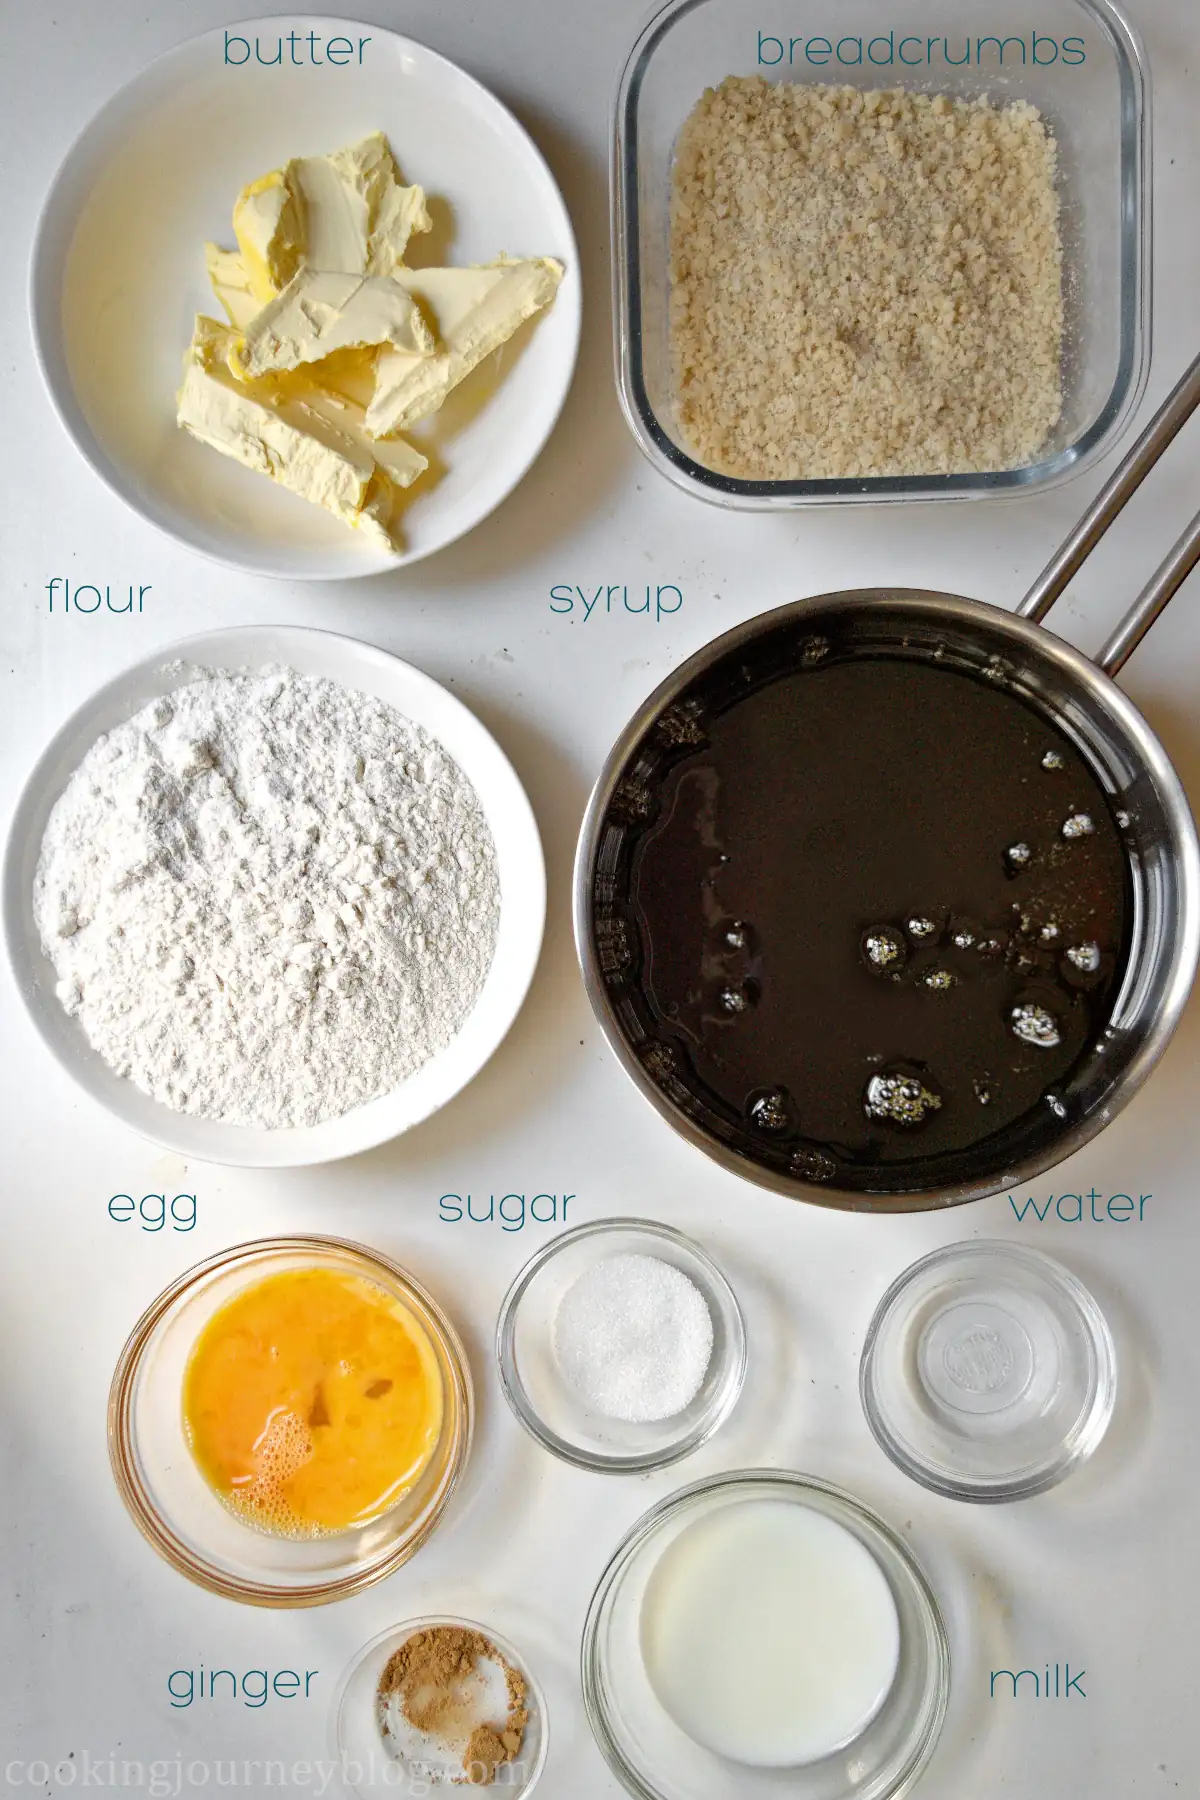 Ingrredients for treacle tart: butter, breadcrumbs, flour, syrup, egg, sugar, water, ginger powder, milk